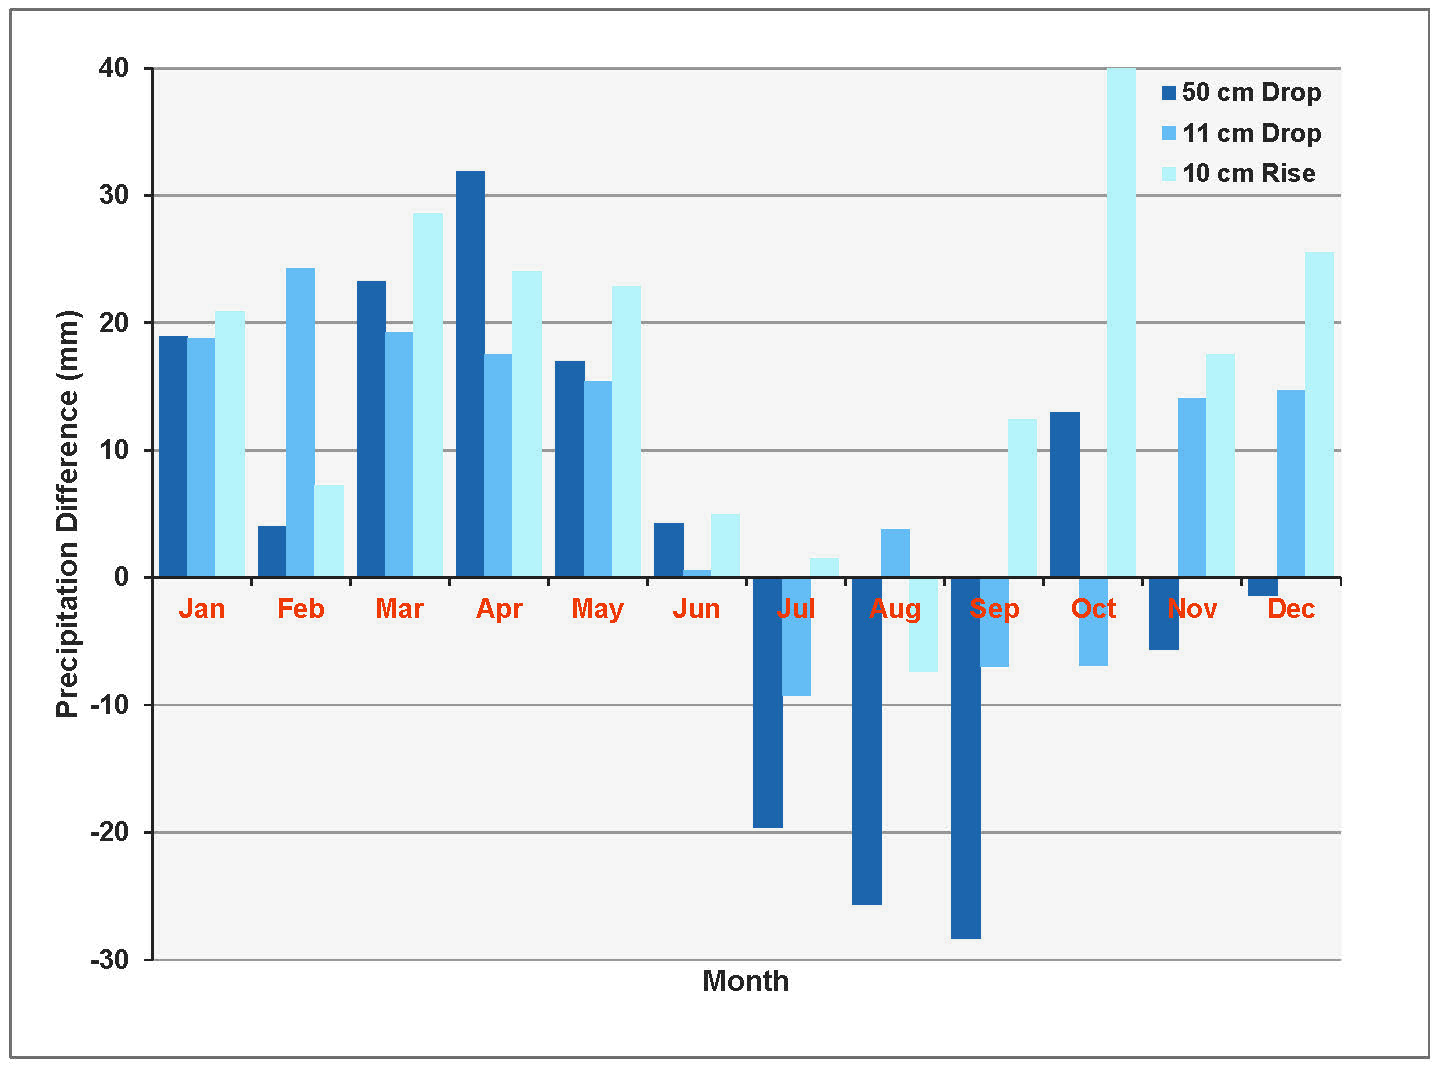 Figure 19: Bar graph showing monthly precipitation predictions from three global climate models for the area around PGMN Well W-09. The bars represent monthly precipitation projected for the year 2100 compared to the period 1971 to 2000. All three show higher precipitation in winter, spring and fall and lower precipitation in summer.